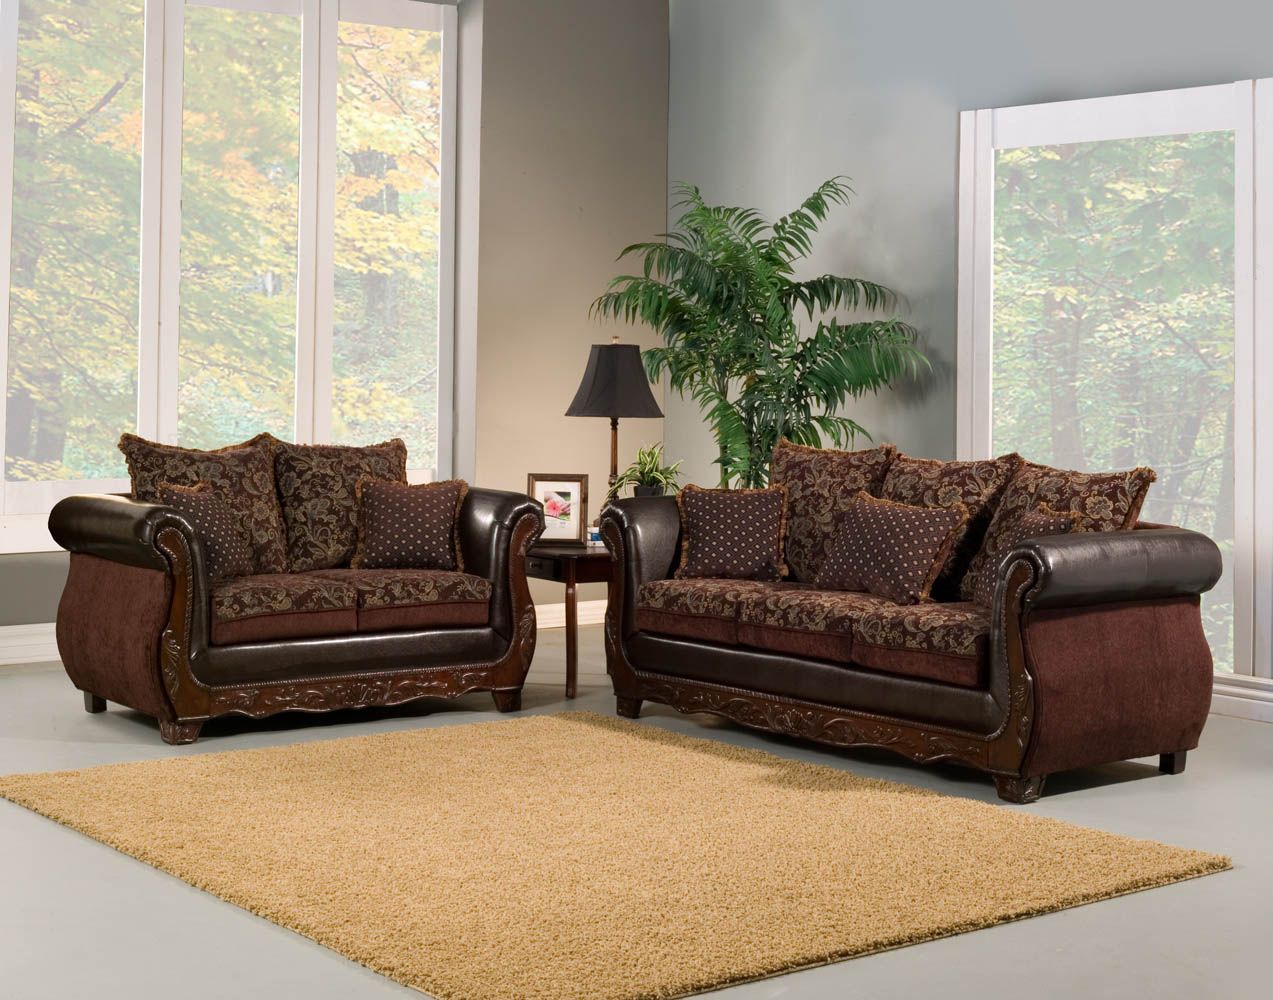 2 Piece Brown Traditional Sofa Set Throughout 2 Piece Round Console Tables Set (View 2 of 20)